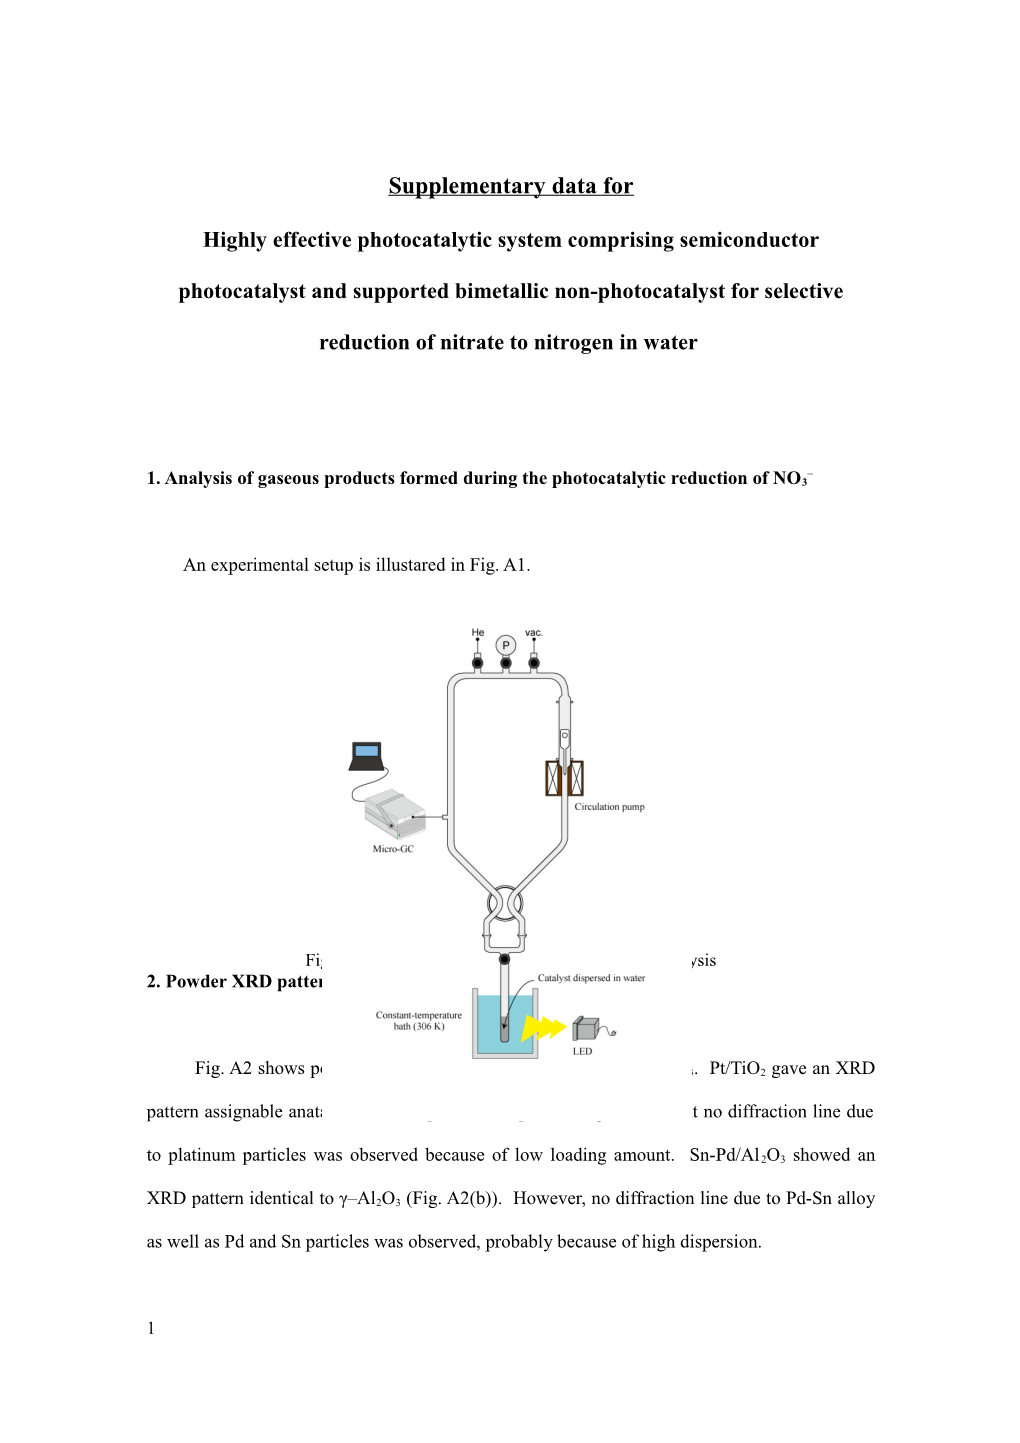 1. Analysis of Gaseous Products Formed During the Photocatalytic Reduction of NO3